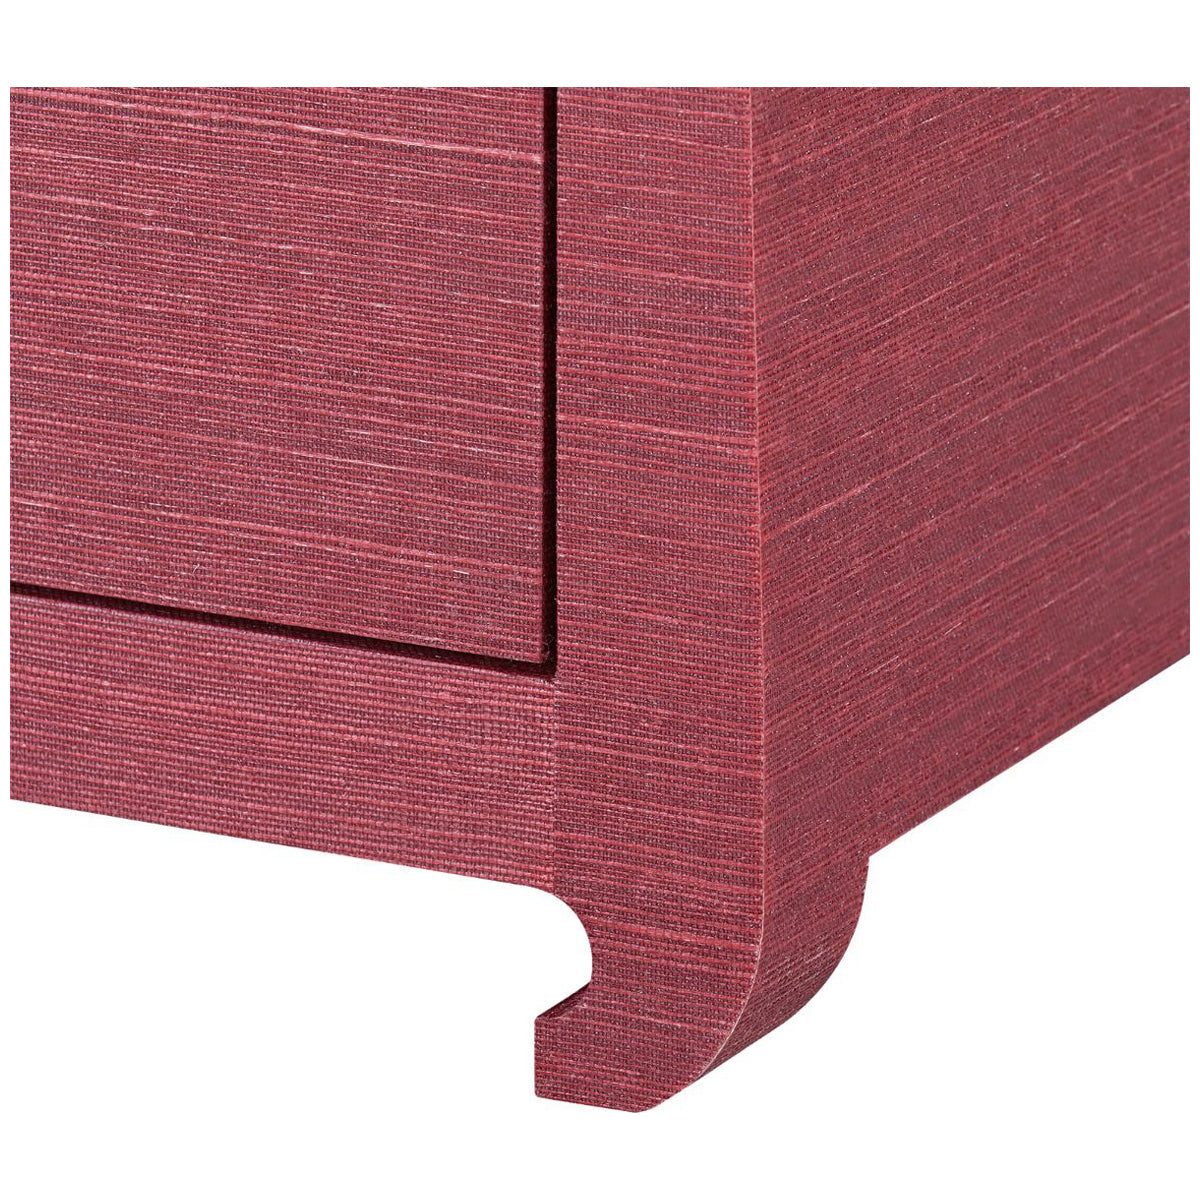 Villa &amp; House Ming 2-Drawer Side Table, Red